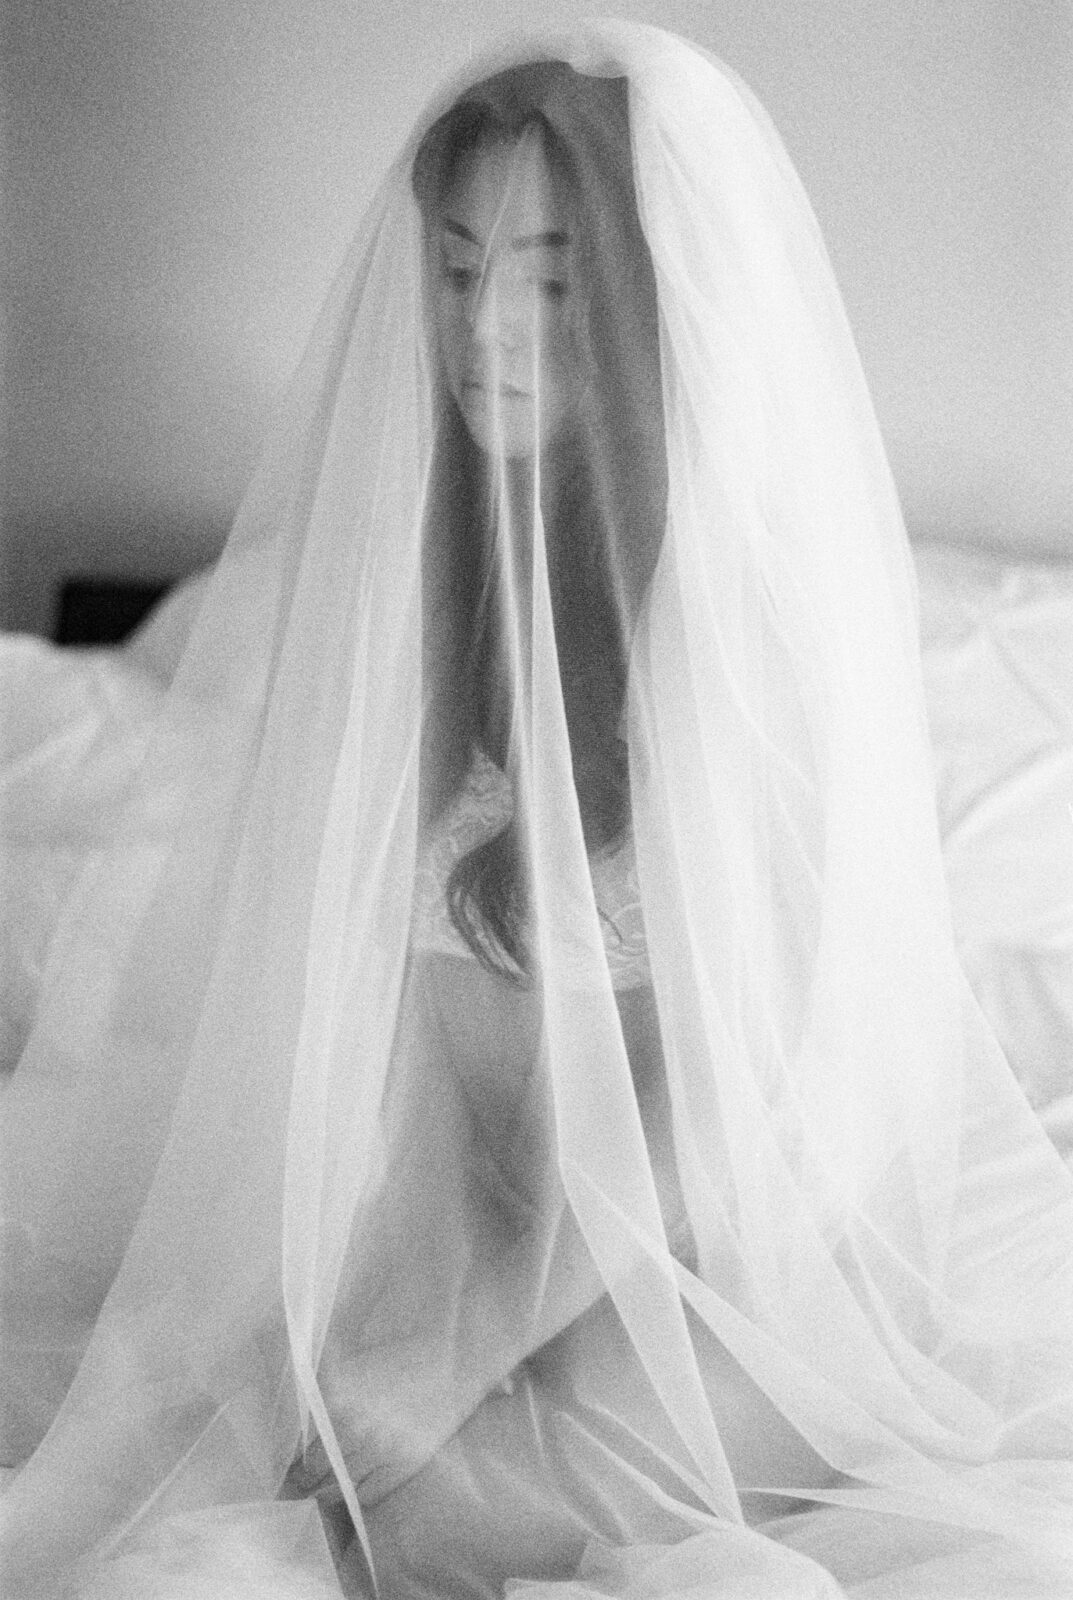 Creative black and white bridal boudoir photo featuring film photography, Bride poses with veil for intimate bridal photoshoot